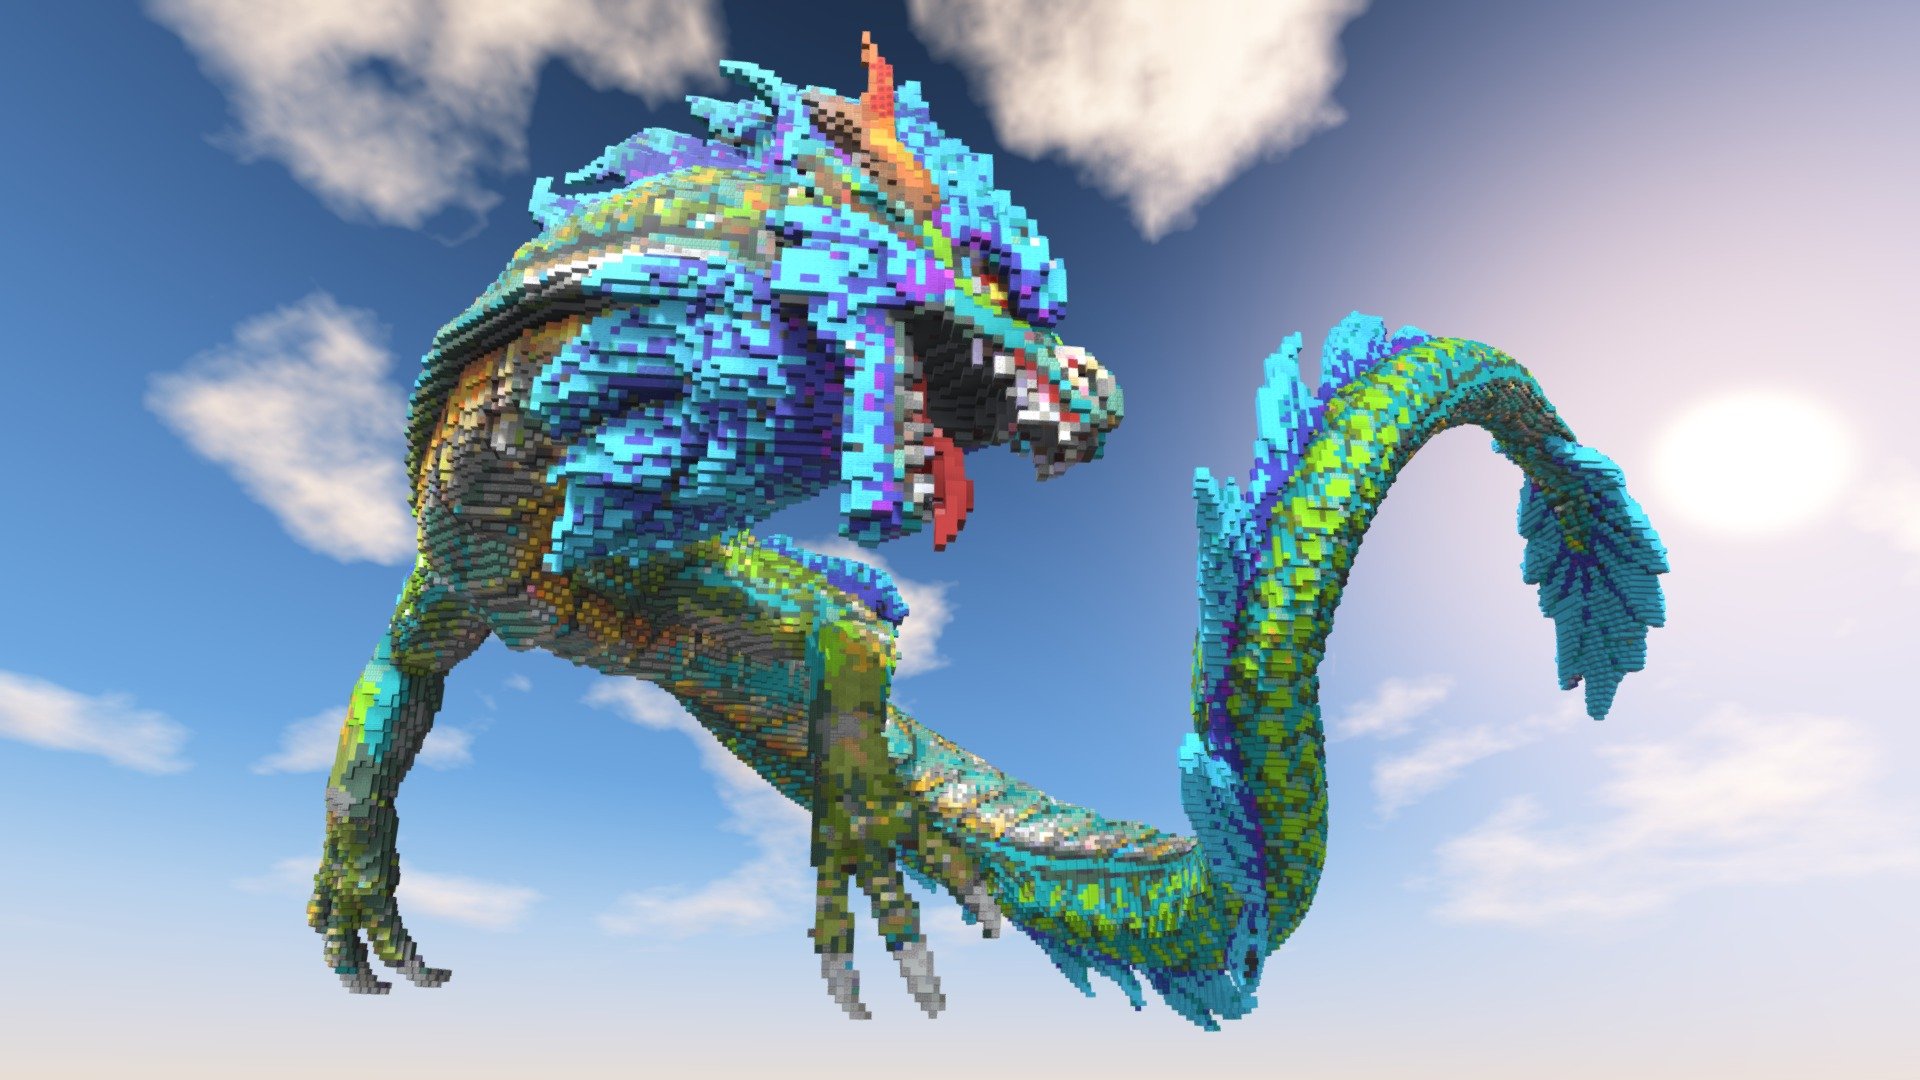 See more ideas about minecraft ender dragon, minecraft, minecraft drawings....